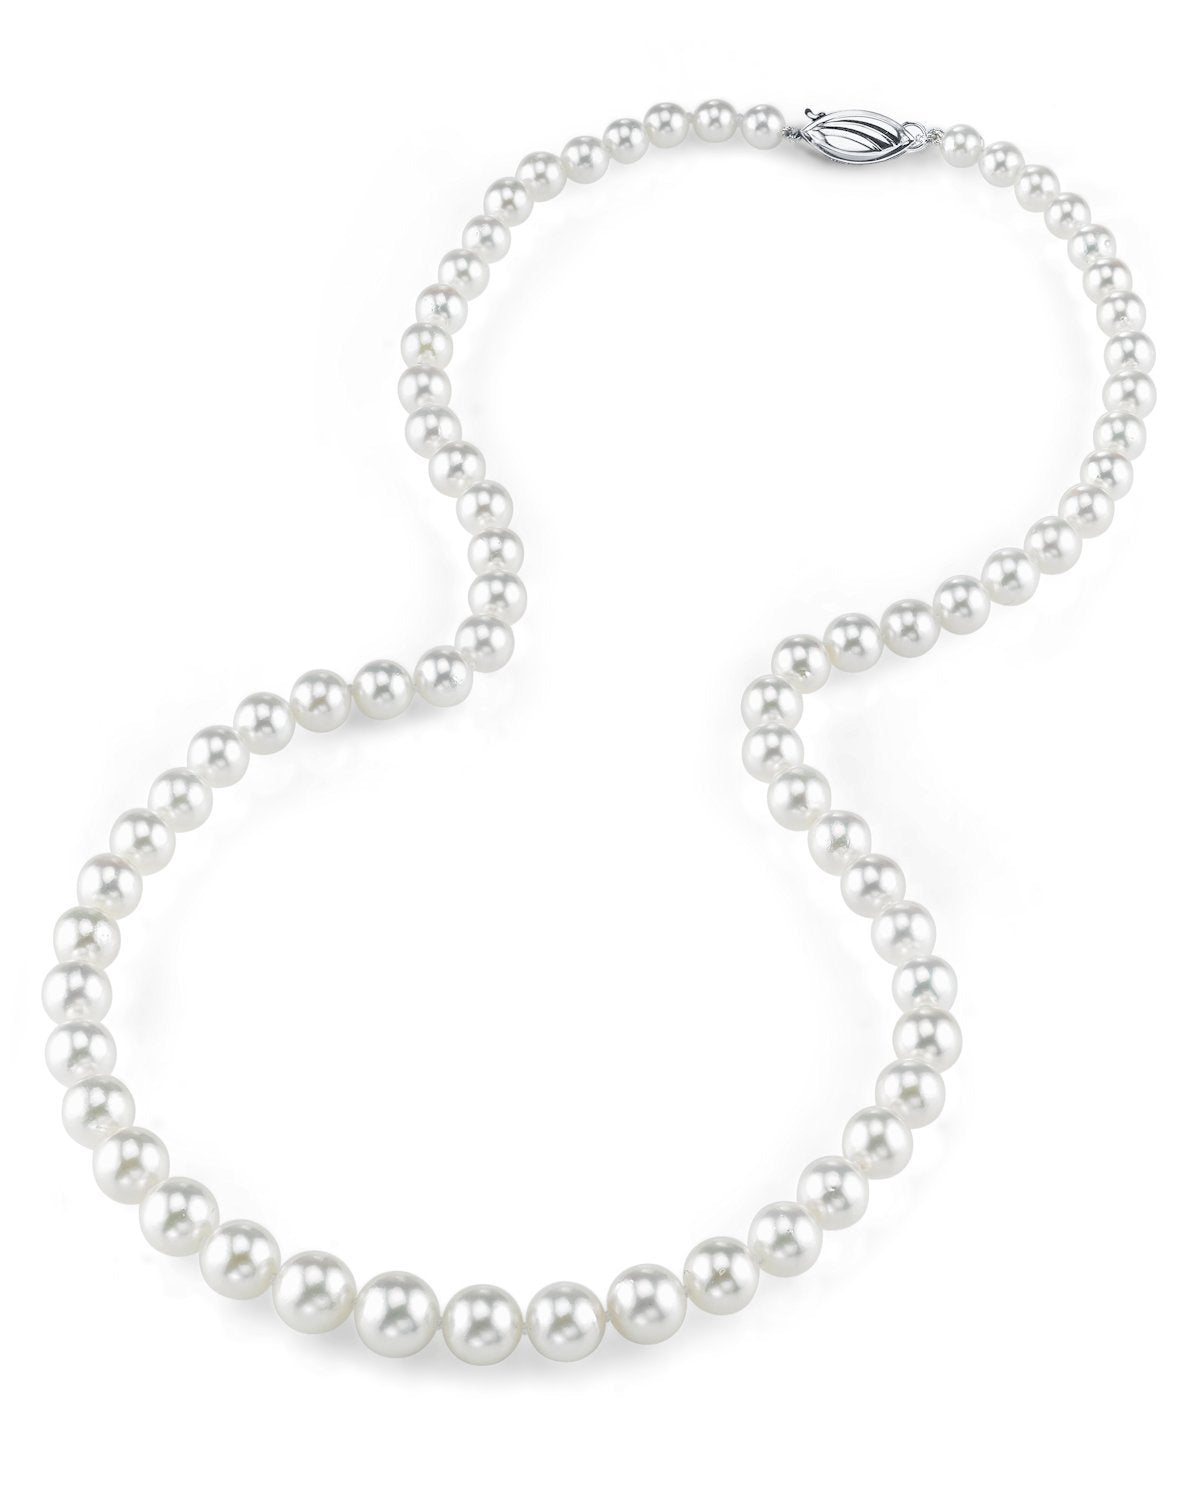 5.0-7.0mm Japanese Akoya White Graduated Pearl Necklace